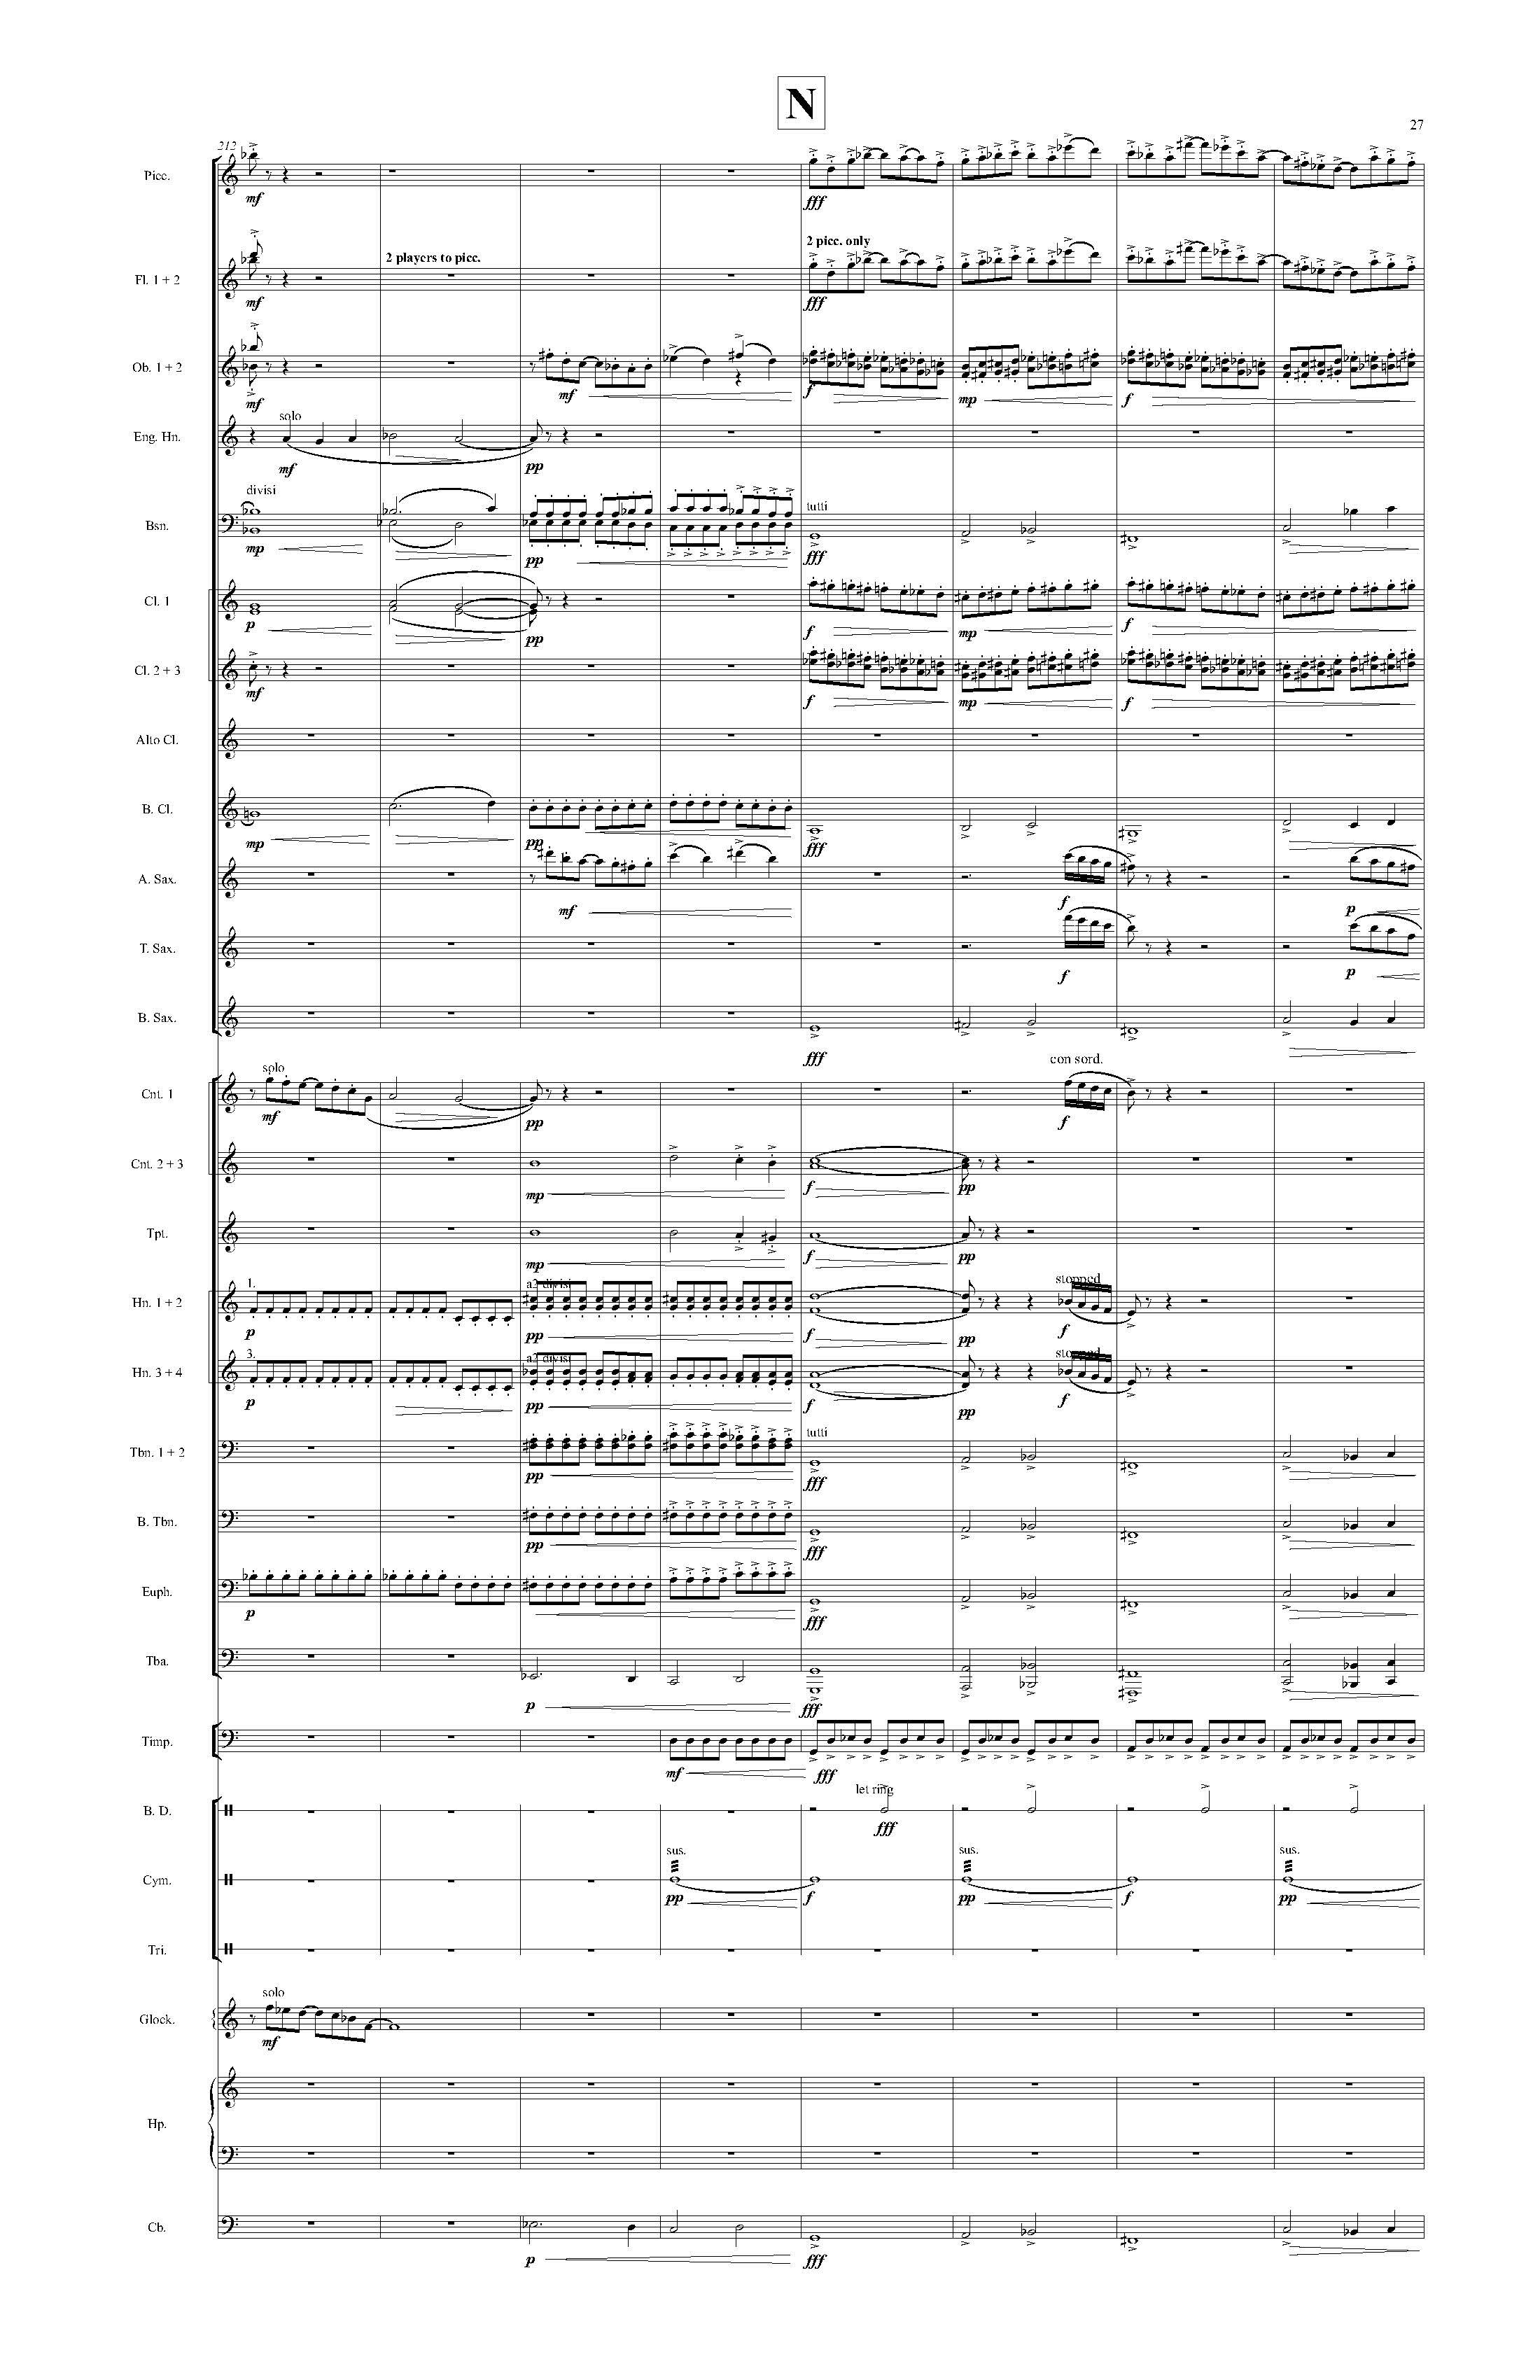 Psyche - Complete Score_Page_33.jpg